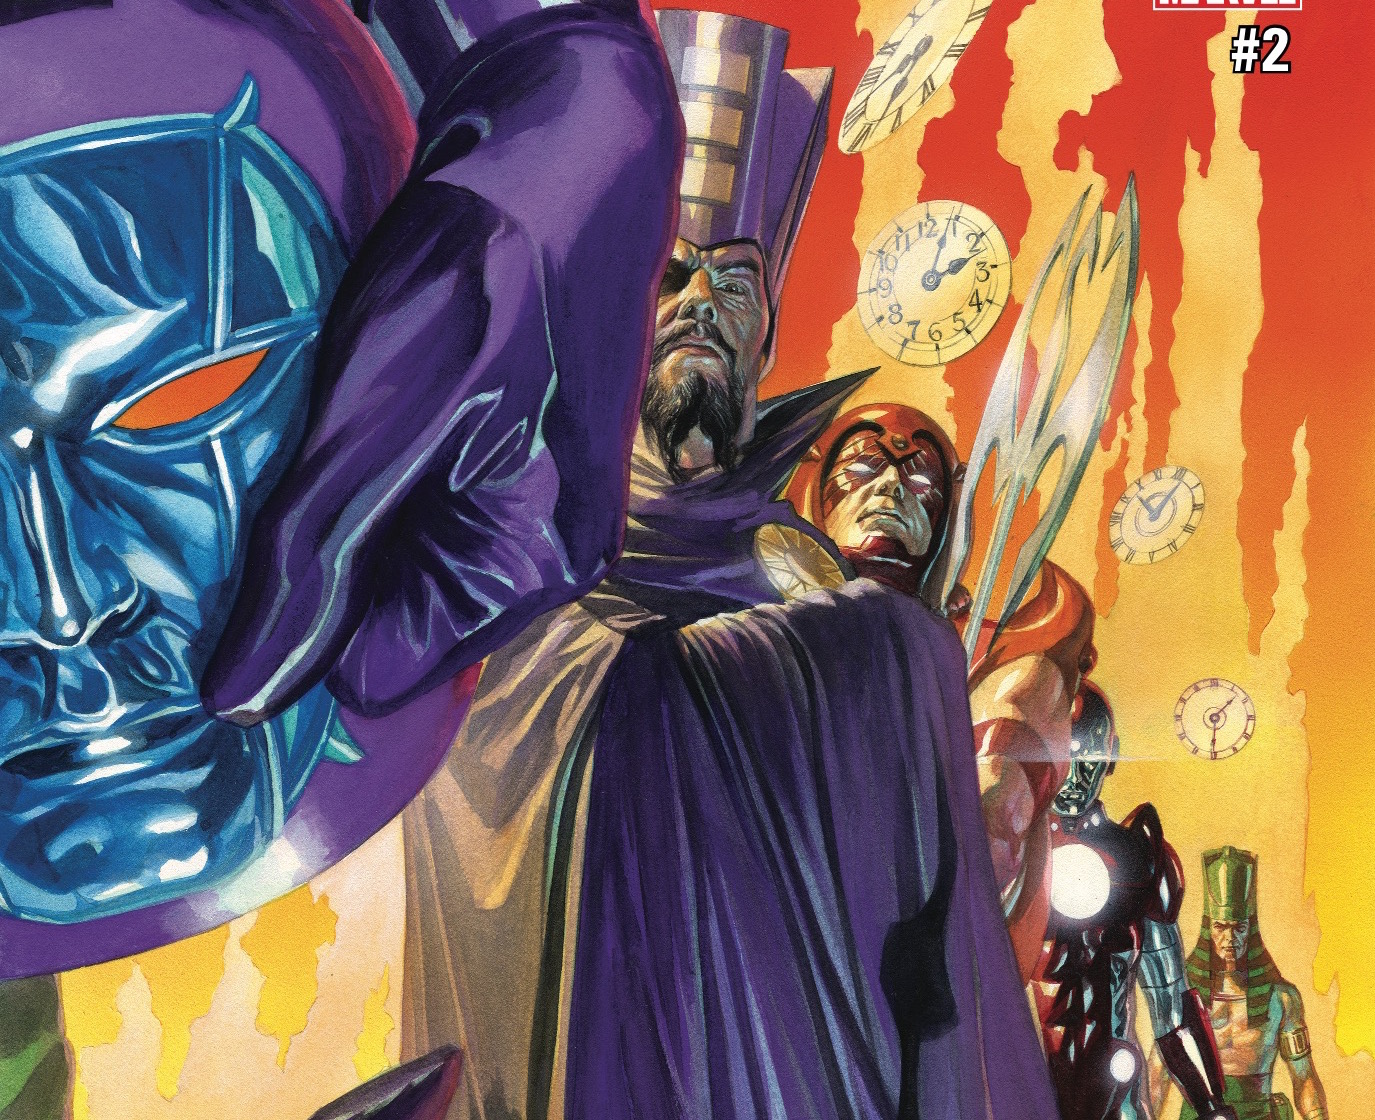 Avengers #2 Review